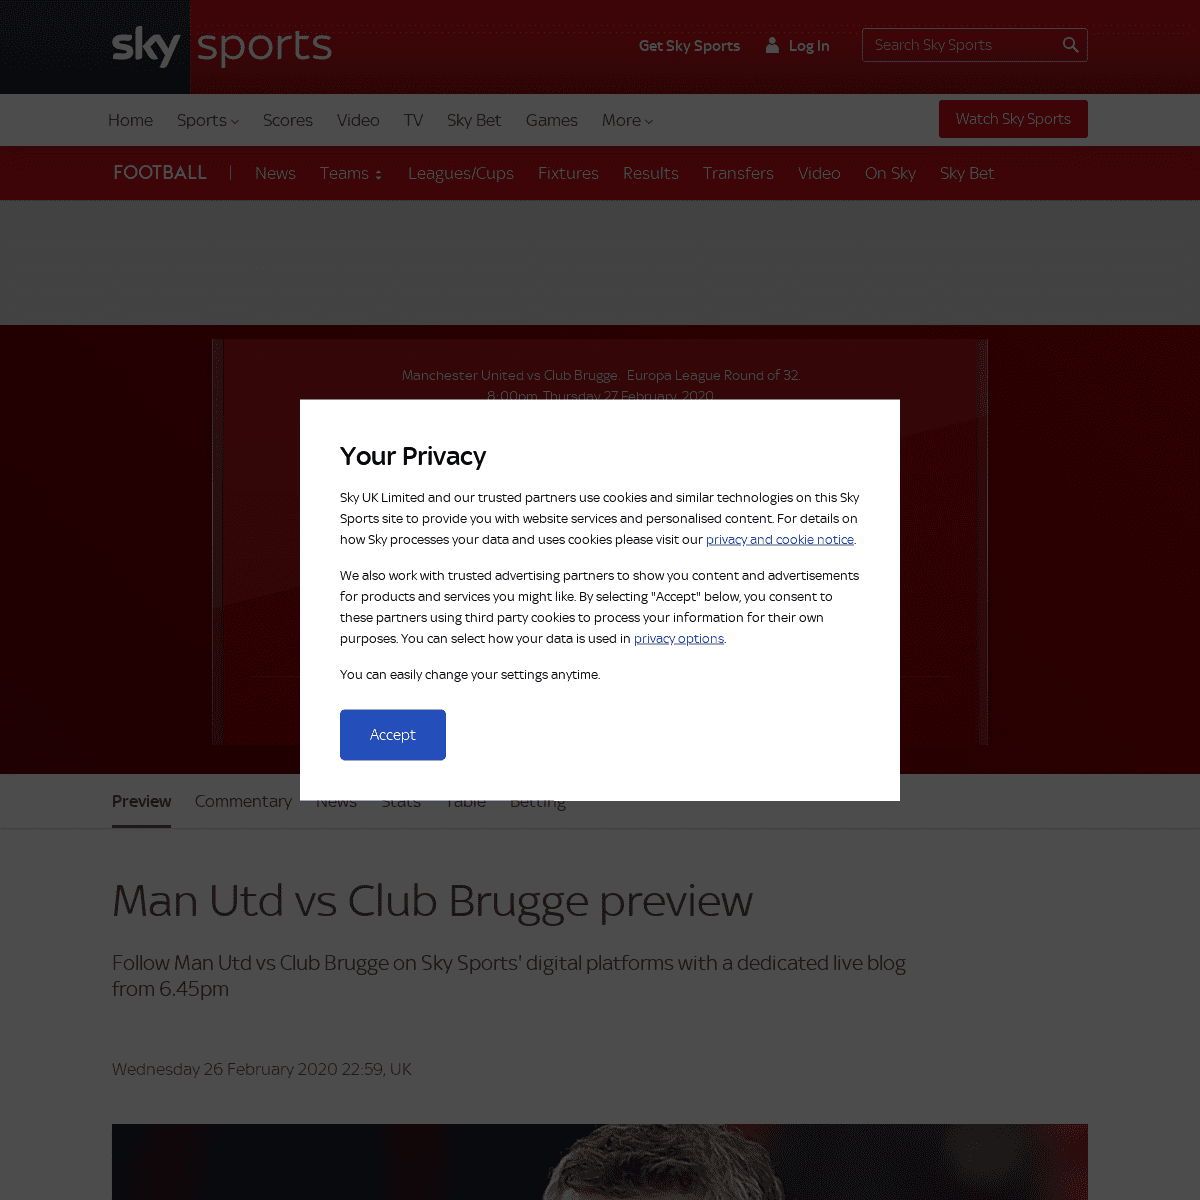 A complete backup of www.skysports.com/football/man-utd-vs-club-brugge/preview/421763